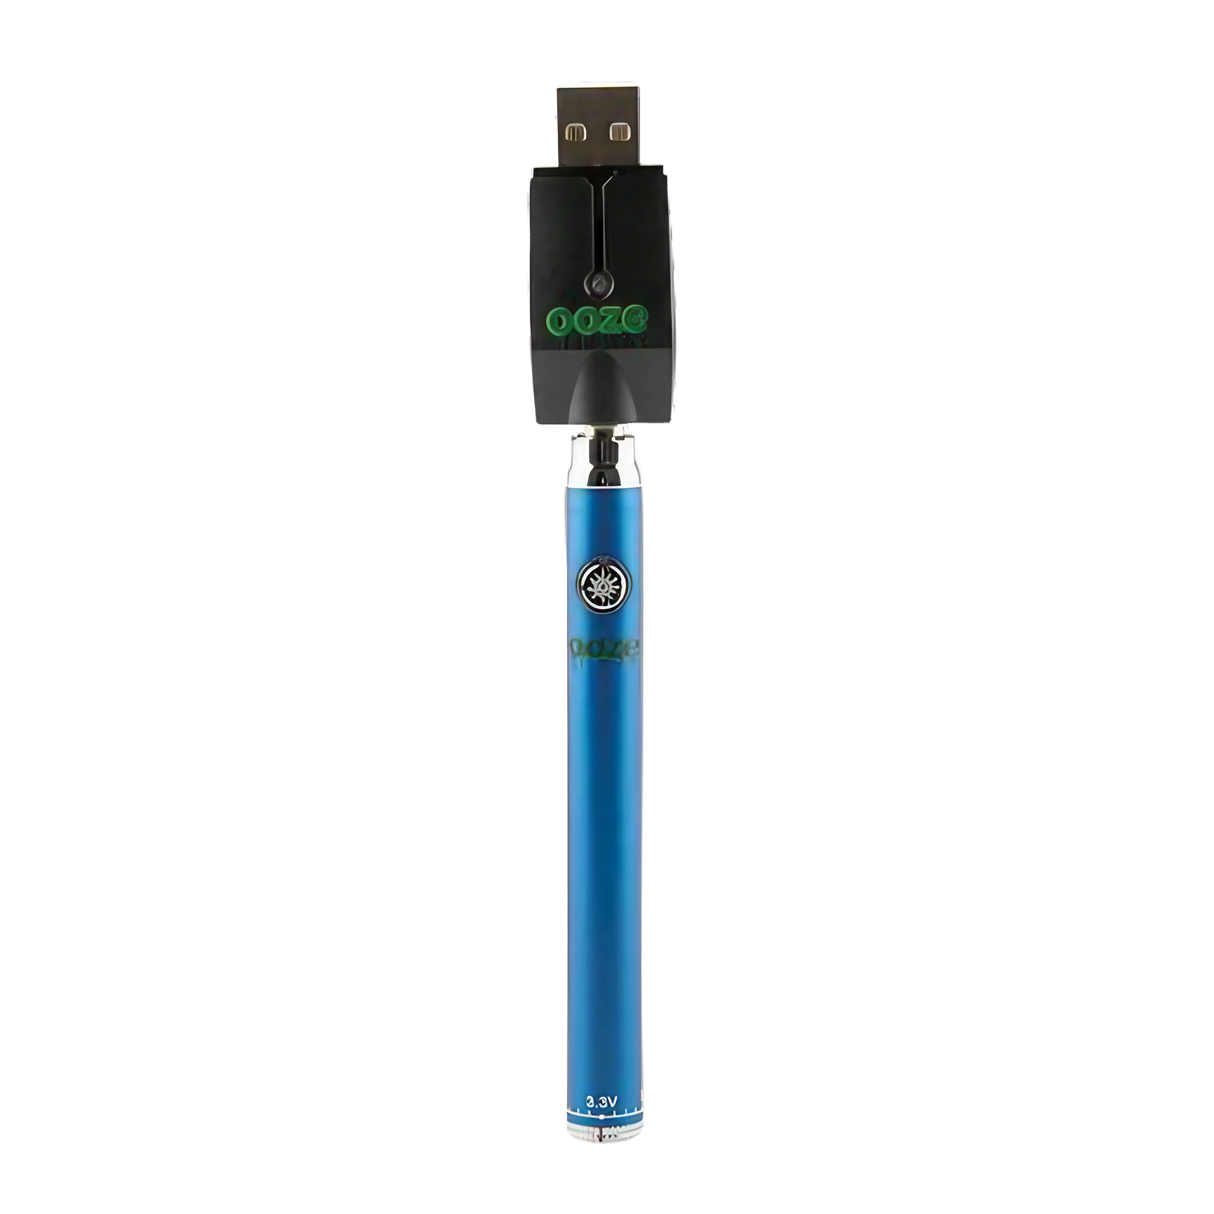 Ooze Slim Twist Battery in Blue with USB Charger, 510 Thread for Vaporizers - Front View